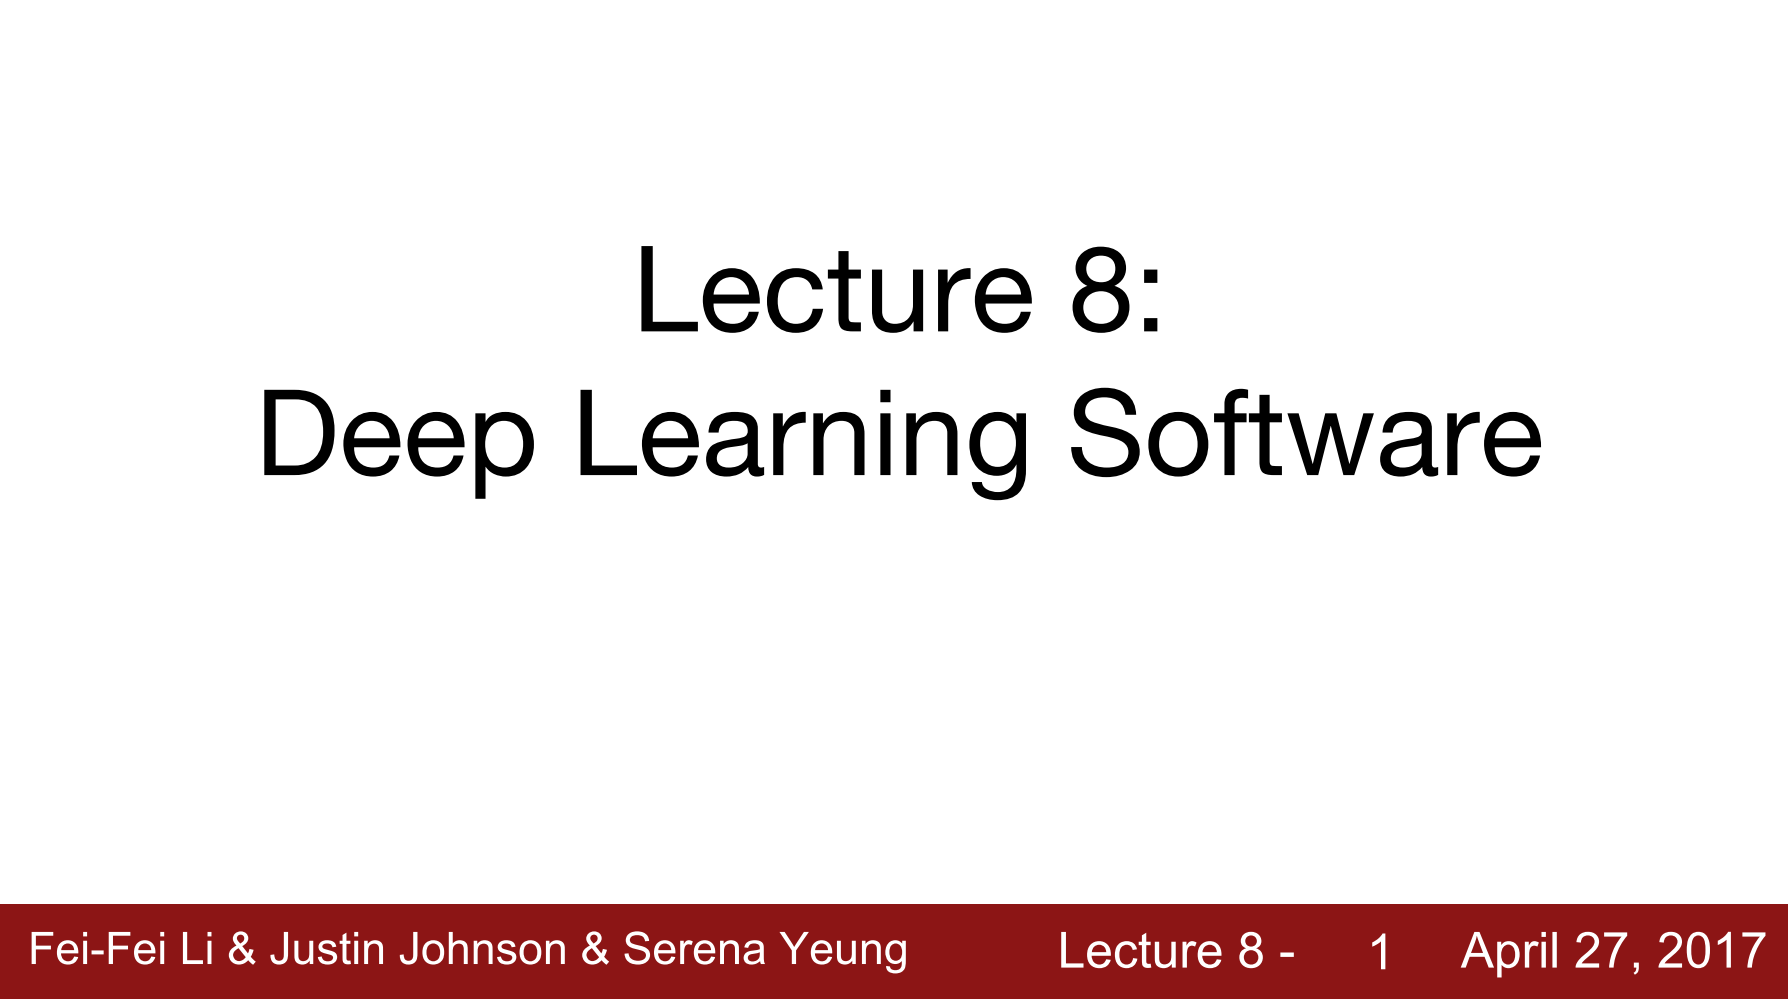 8. Deep Learning Software